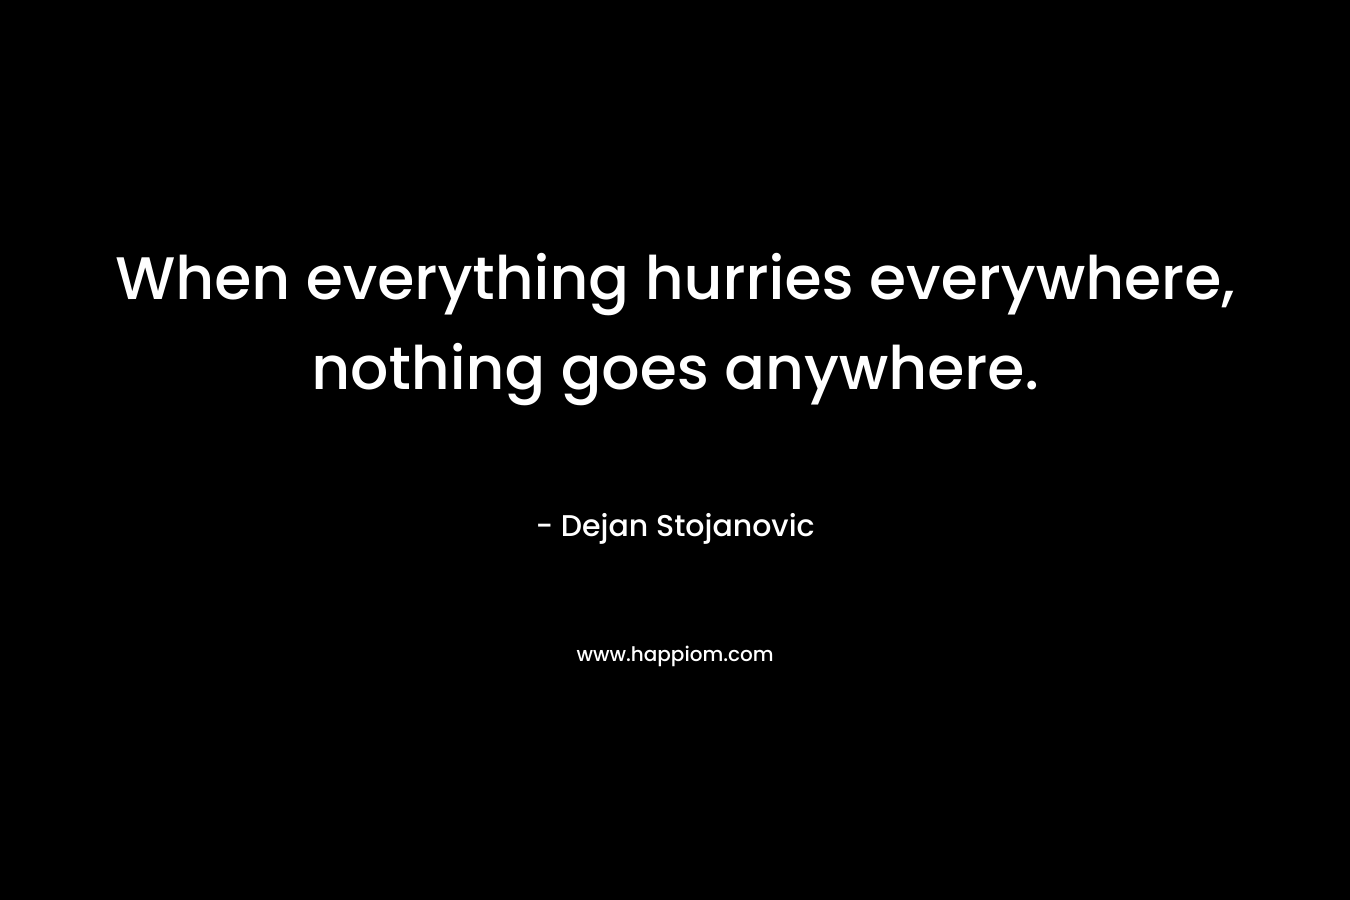 When everything hurries everywhere, nothing goes anywhere.